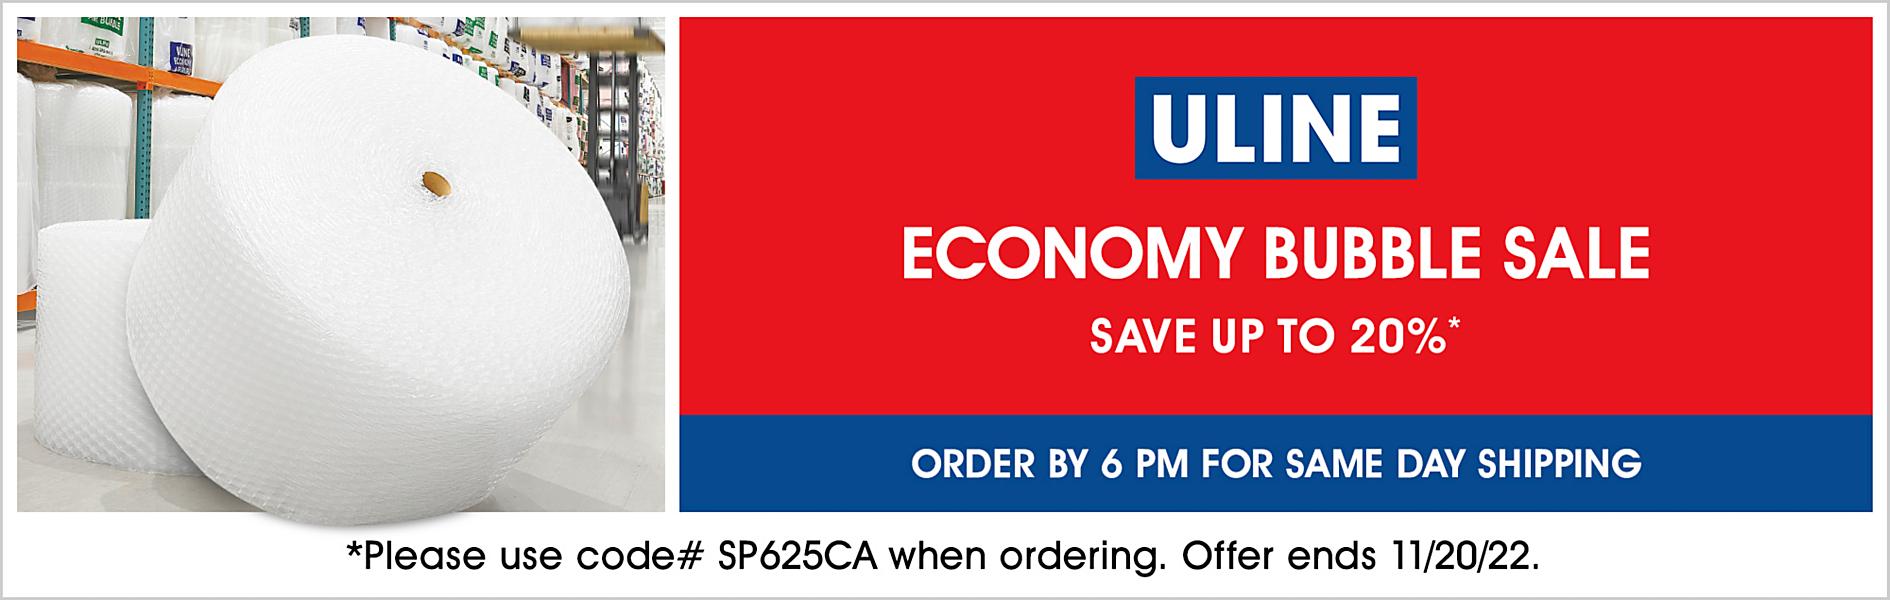 SP625CA Economy Bubble Sale, Save up to 20%, Use code SP625CA, Offer ends 11/20/22